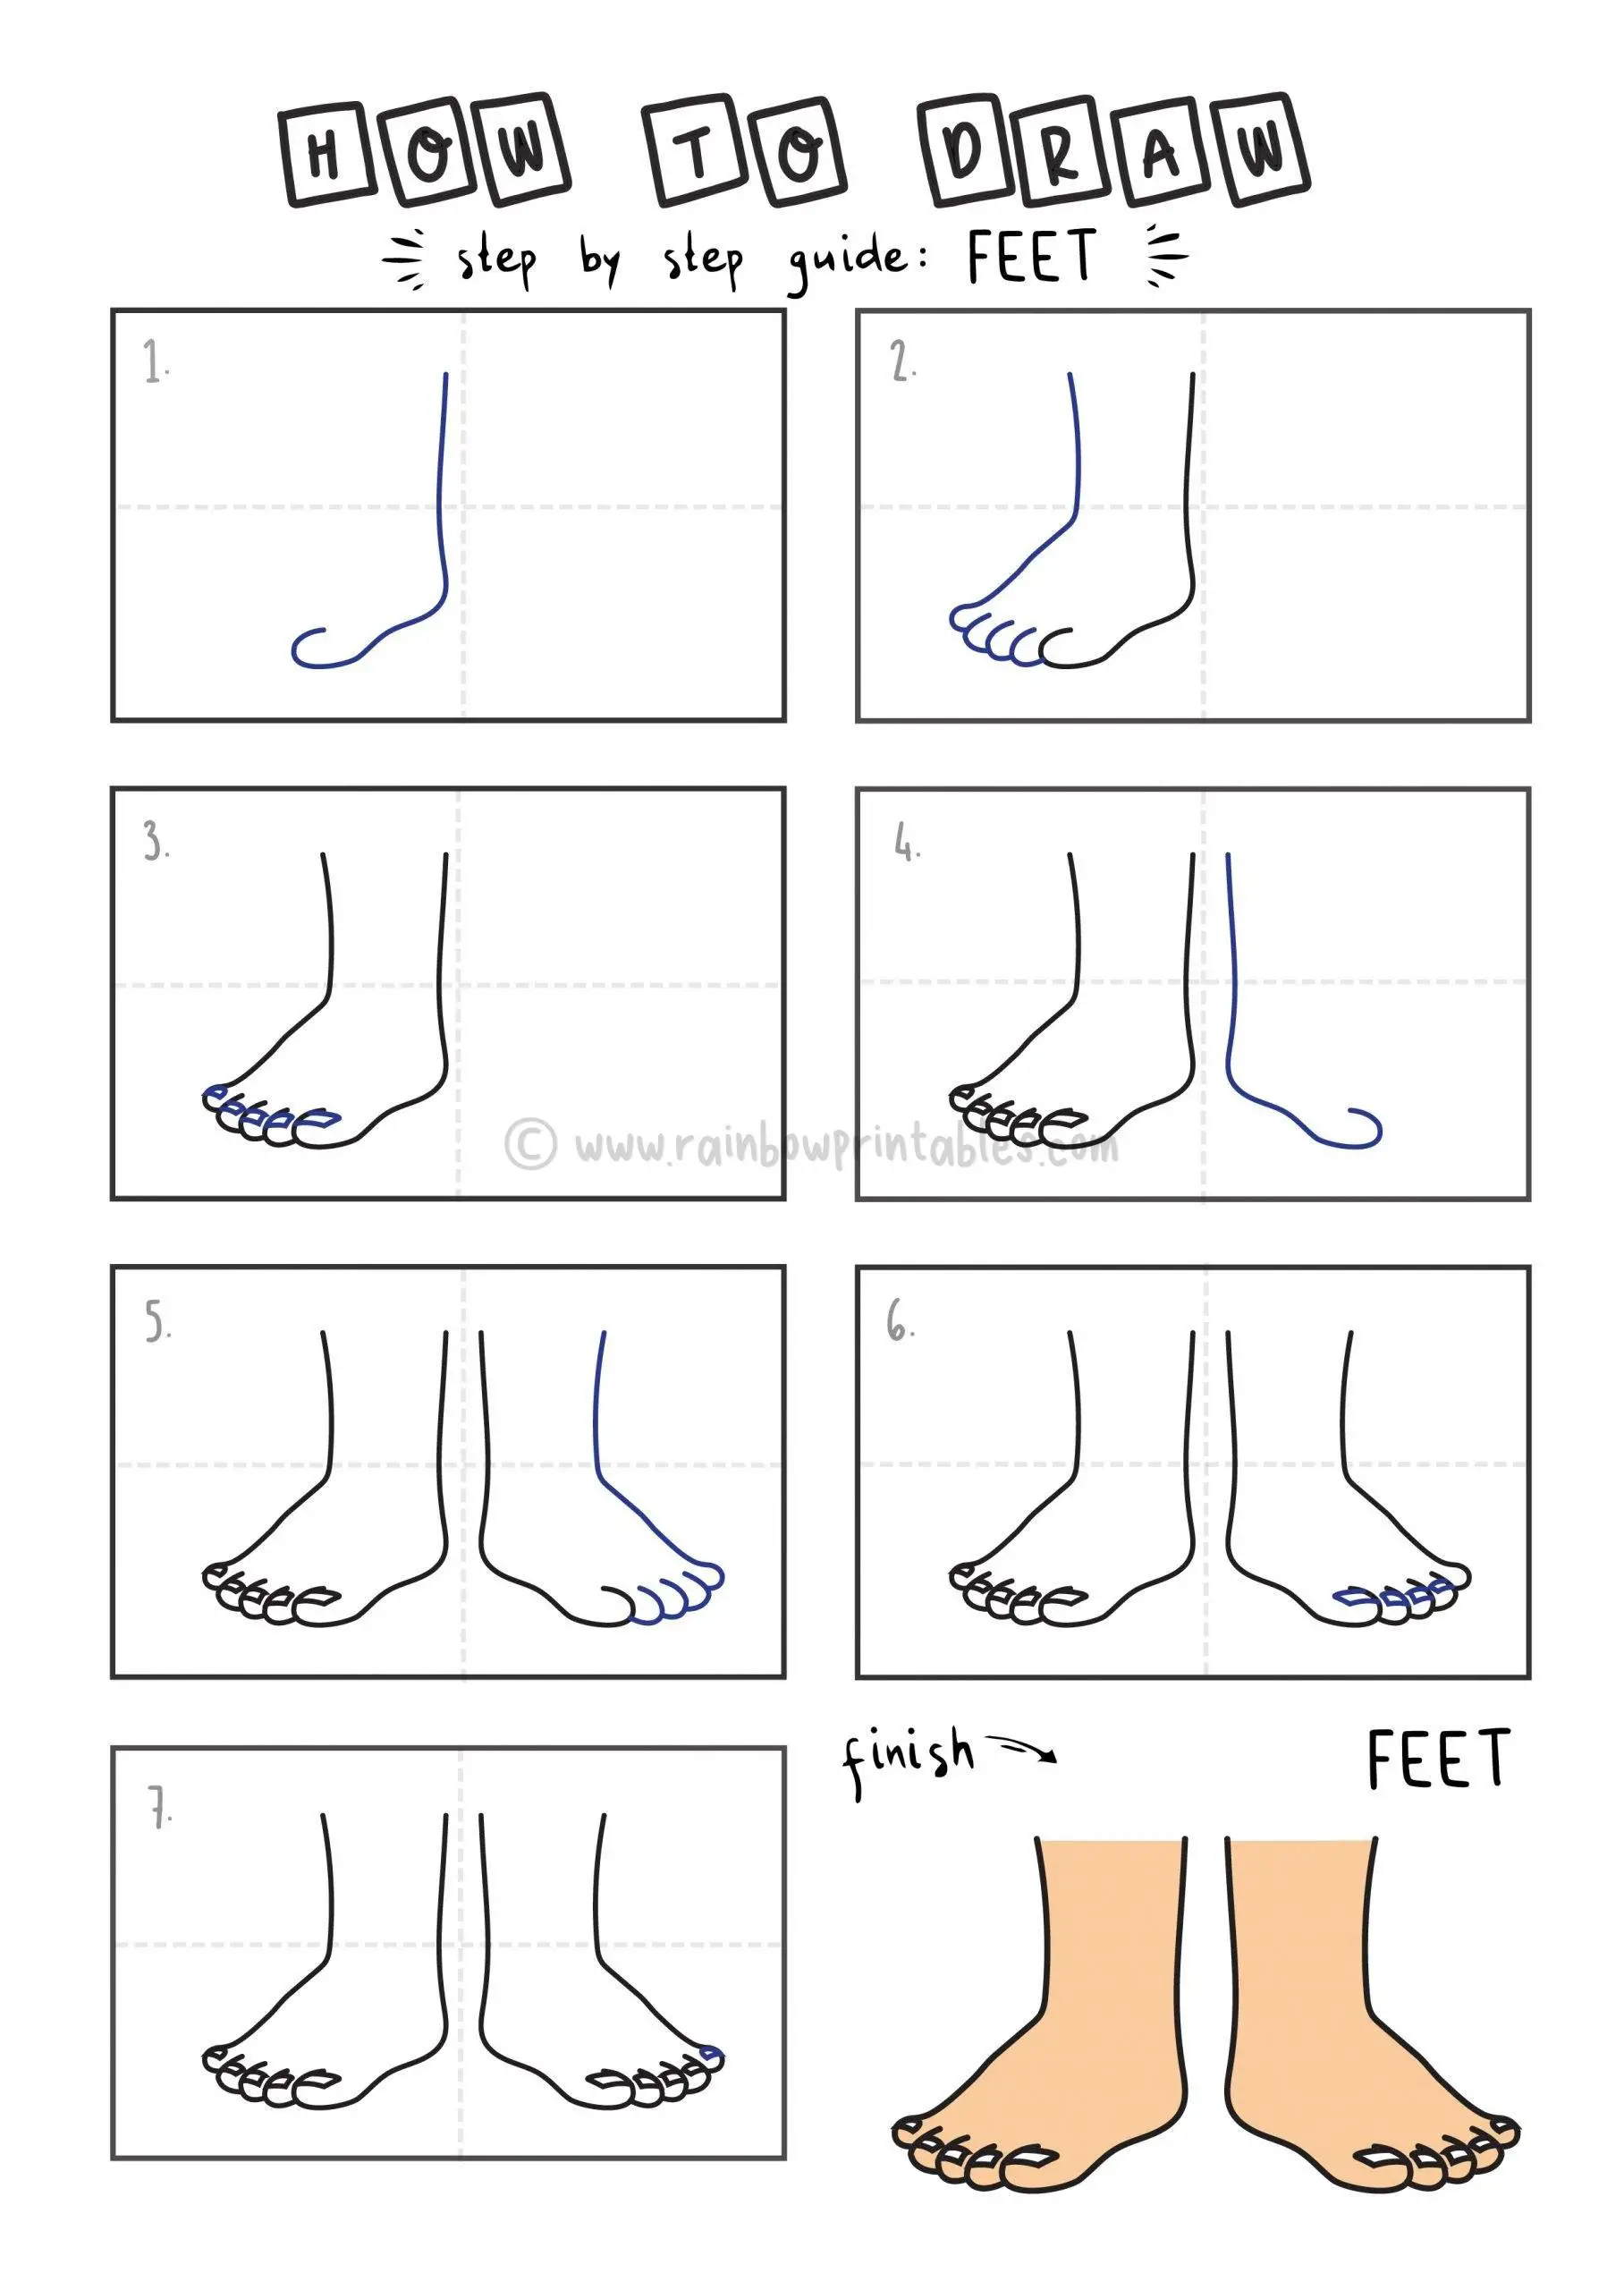 How To Draw Tutorials For Kids FEET YOUNG KIDS EASY DRAWINGS ART GUIDE STEP BY STEP